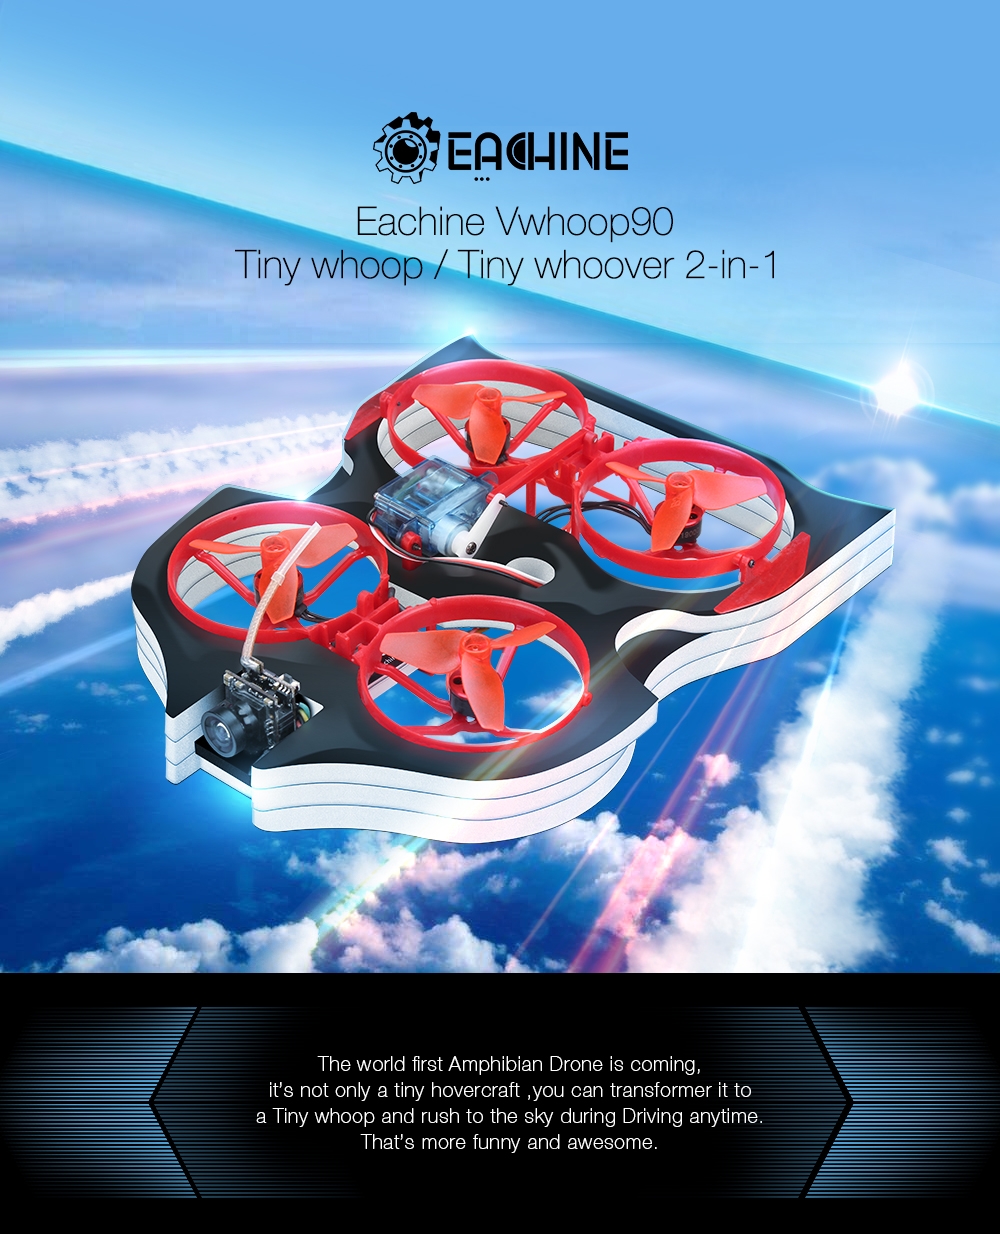 Eachine Vwhoop90 Brushless Tiny Whoop Tiny Whoov 2-in-1 FPV Racing Drone with Crazybee F3 700TVL Cam